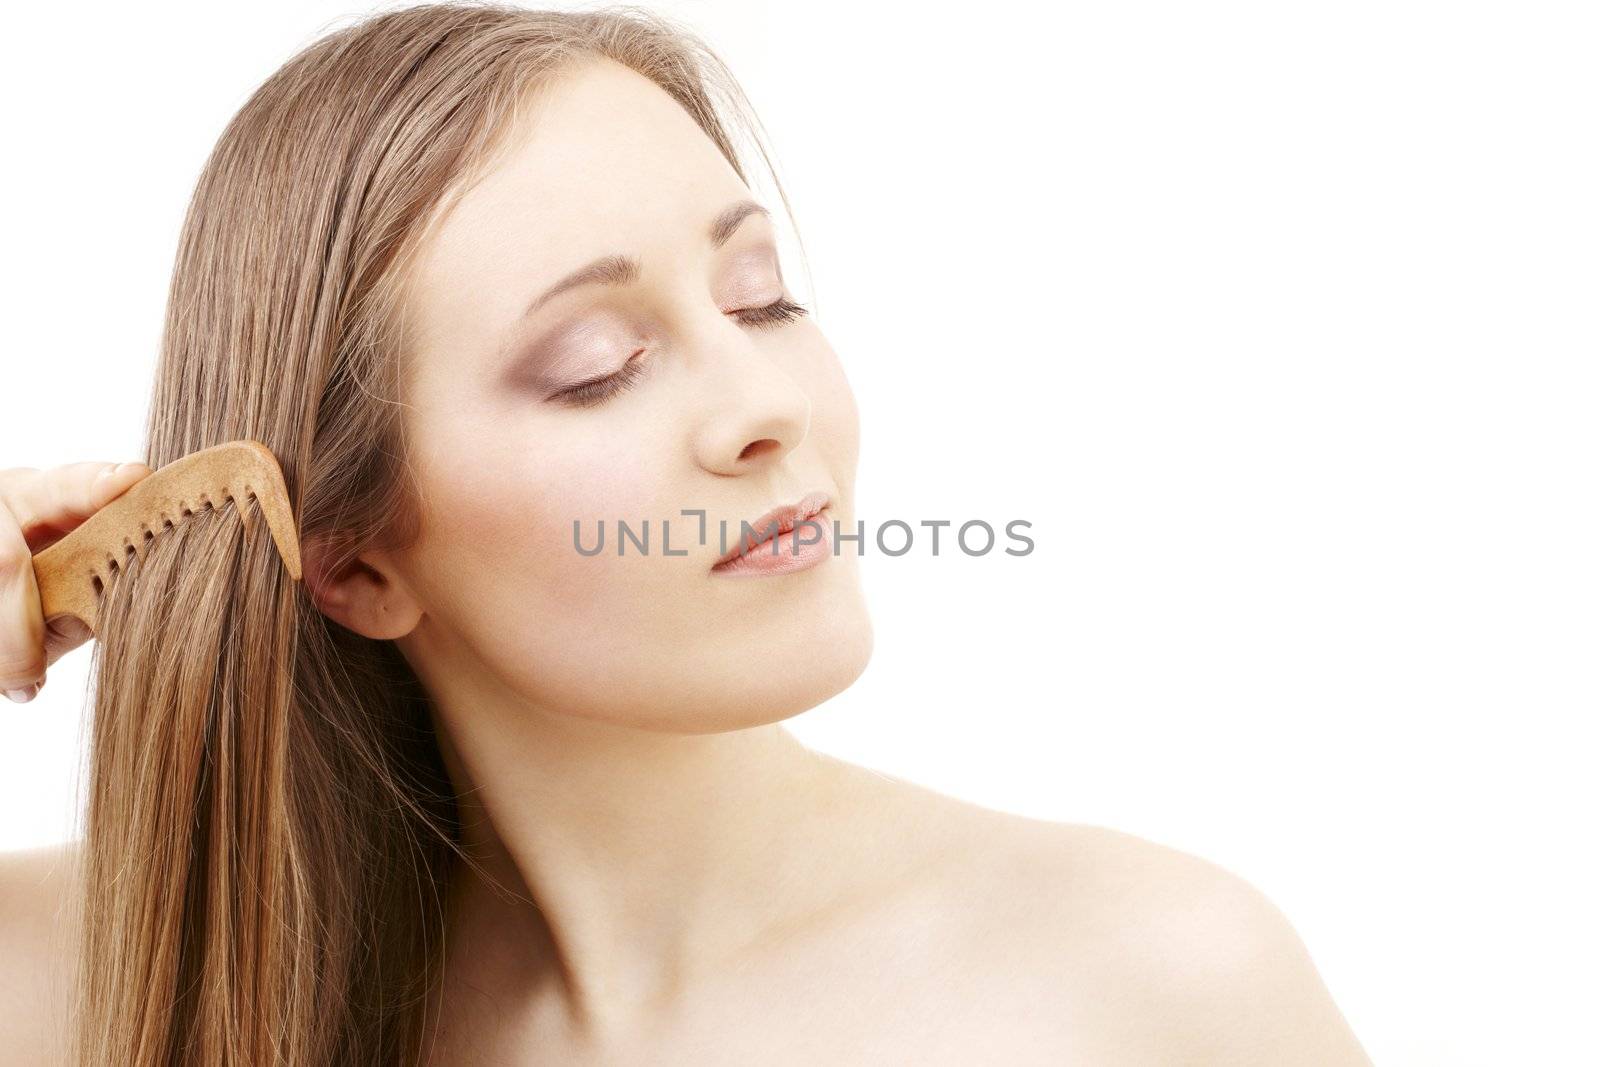 bright picture of combing woman over white